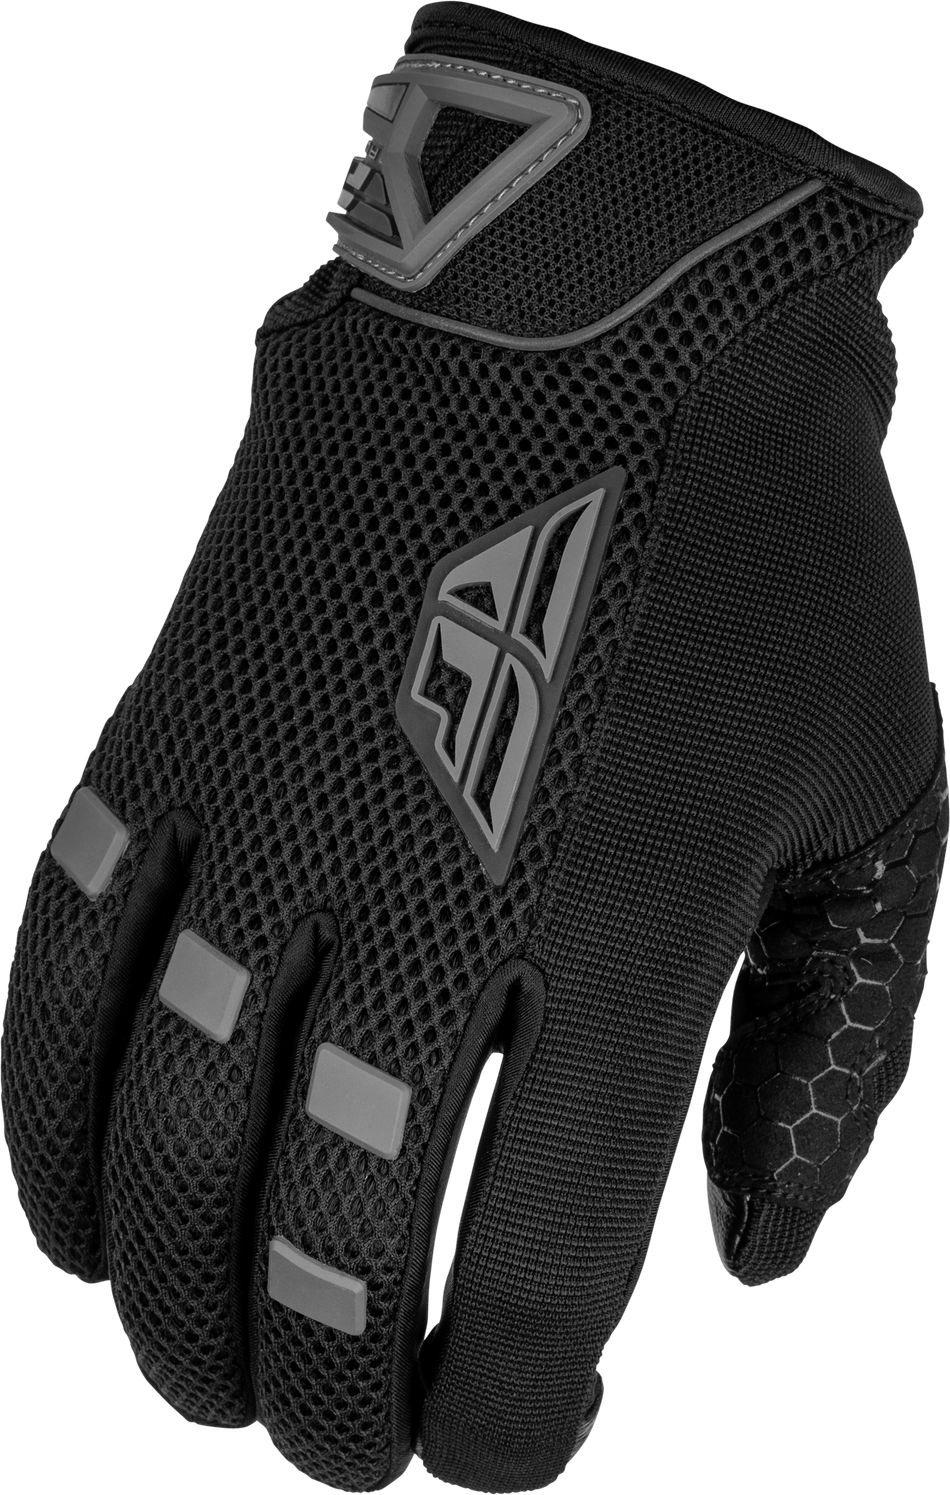 FLY RACING Women's Coolpro Gloves Black Xl 476-6214X